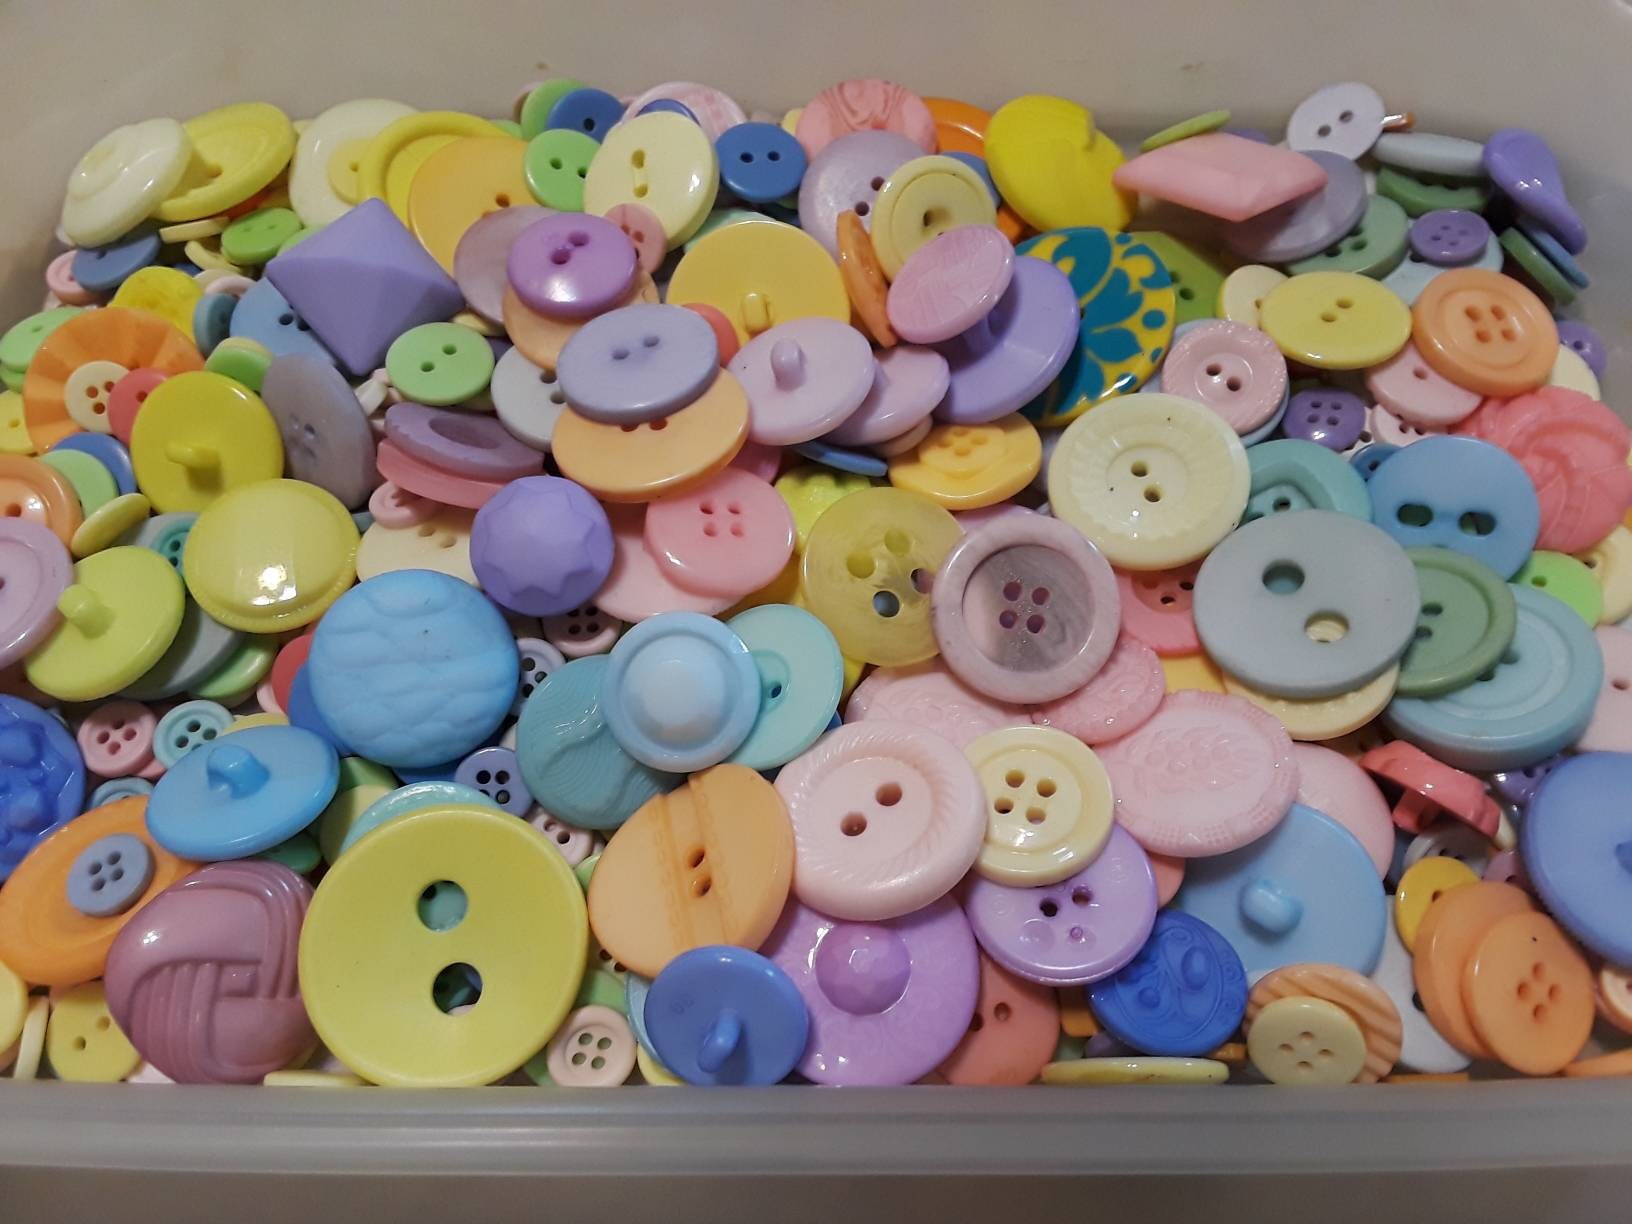 Bulk Buttons, 500 Pastel Colored Buttons, Craft Buttons, Sewing Buttons,  Lot PST-1